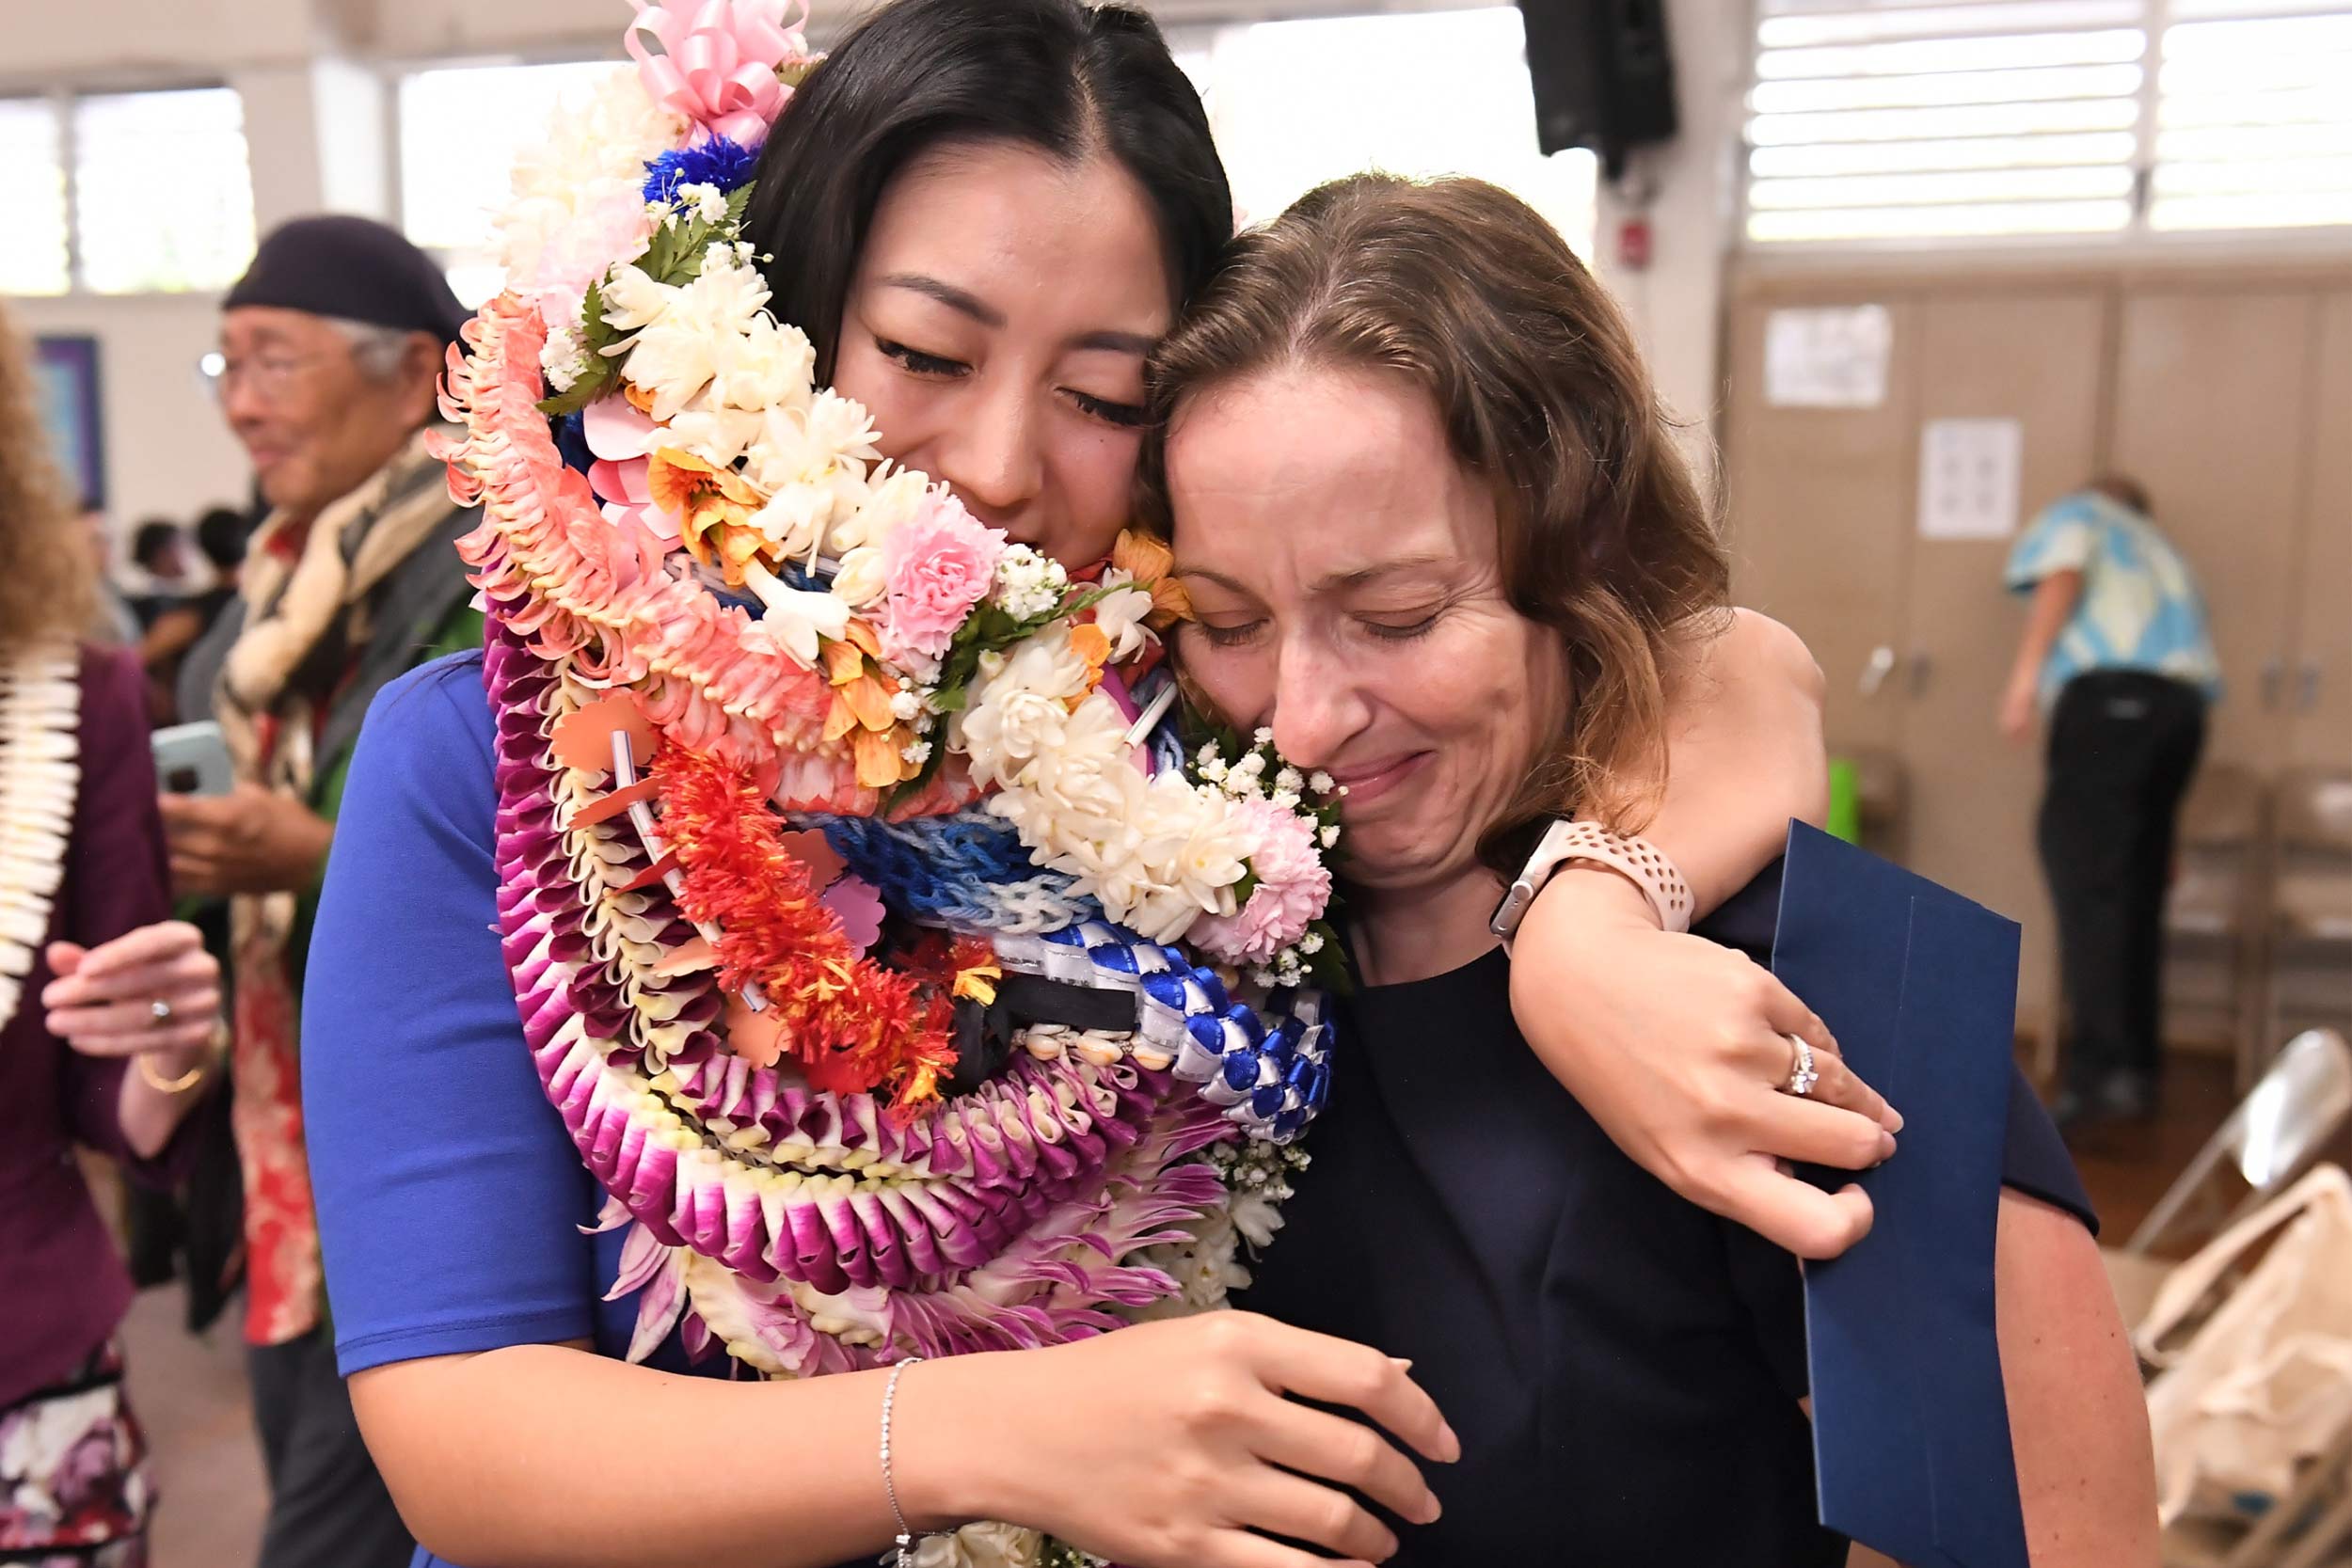 Esther Kwon coverd in ceremonial leis hugging a colleague in her elementary school